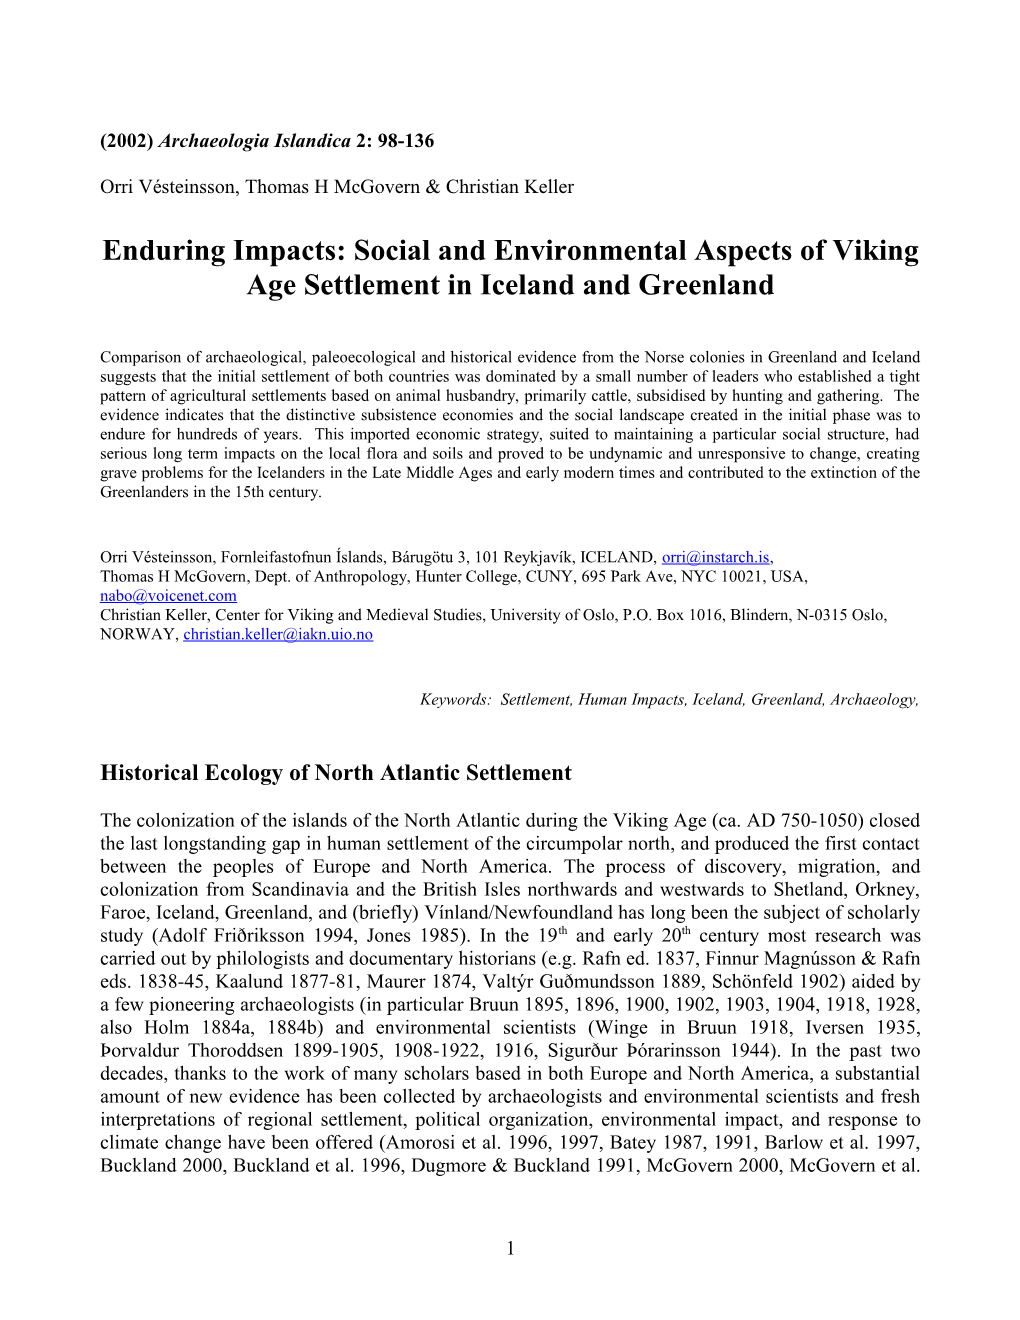 Enduring Impacts: Social and Environmental Aspects of Viking Age Settlement in Iceland